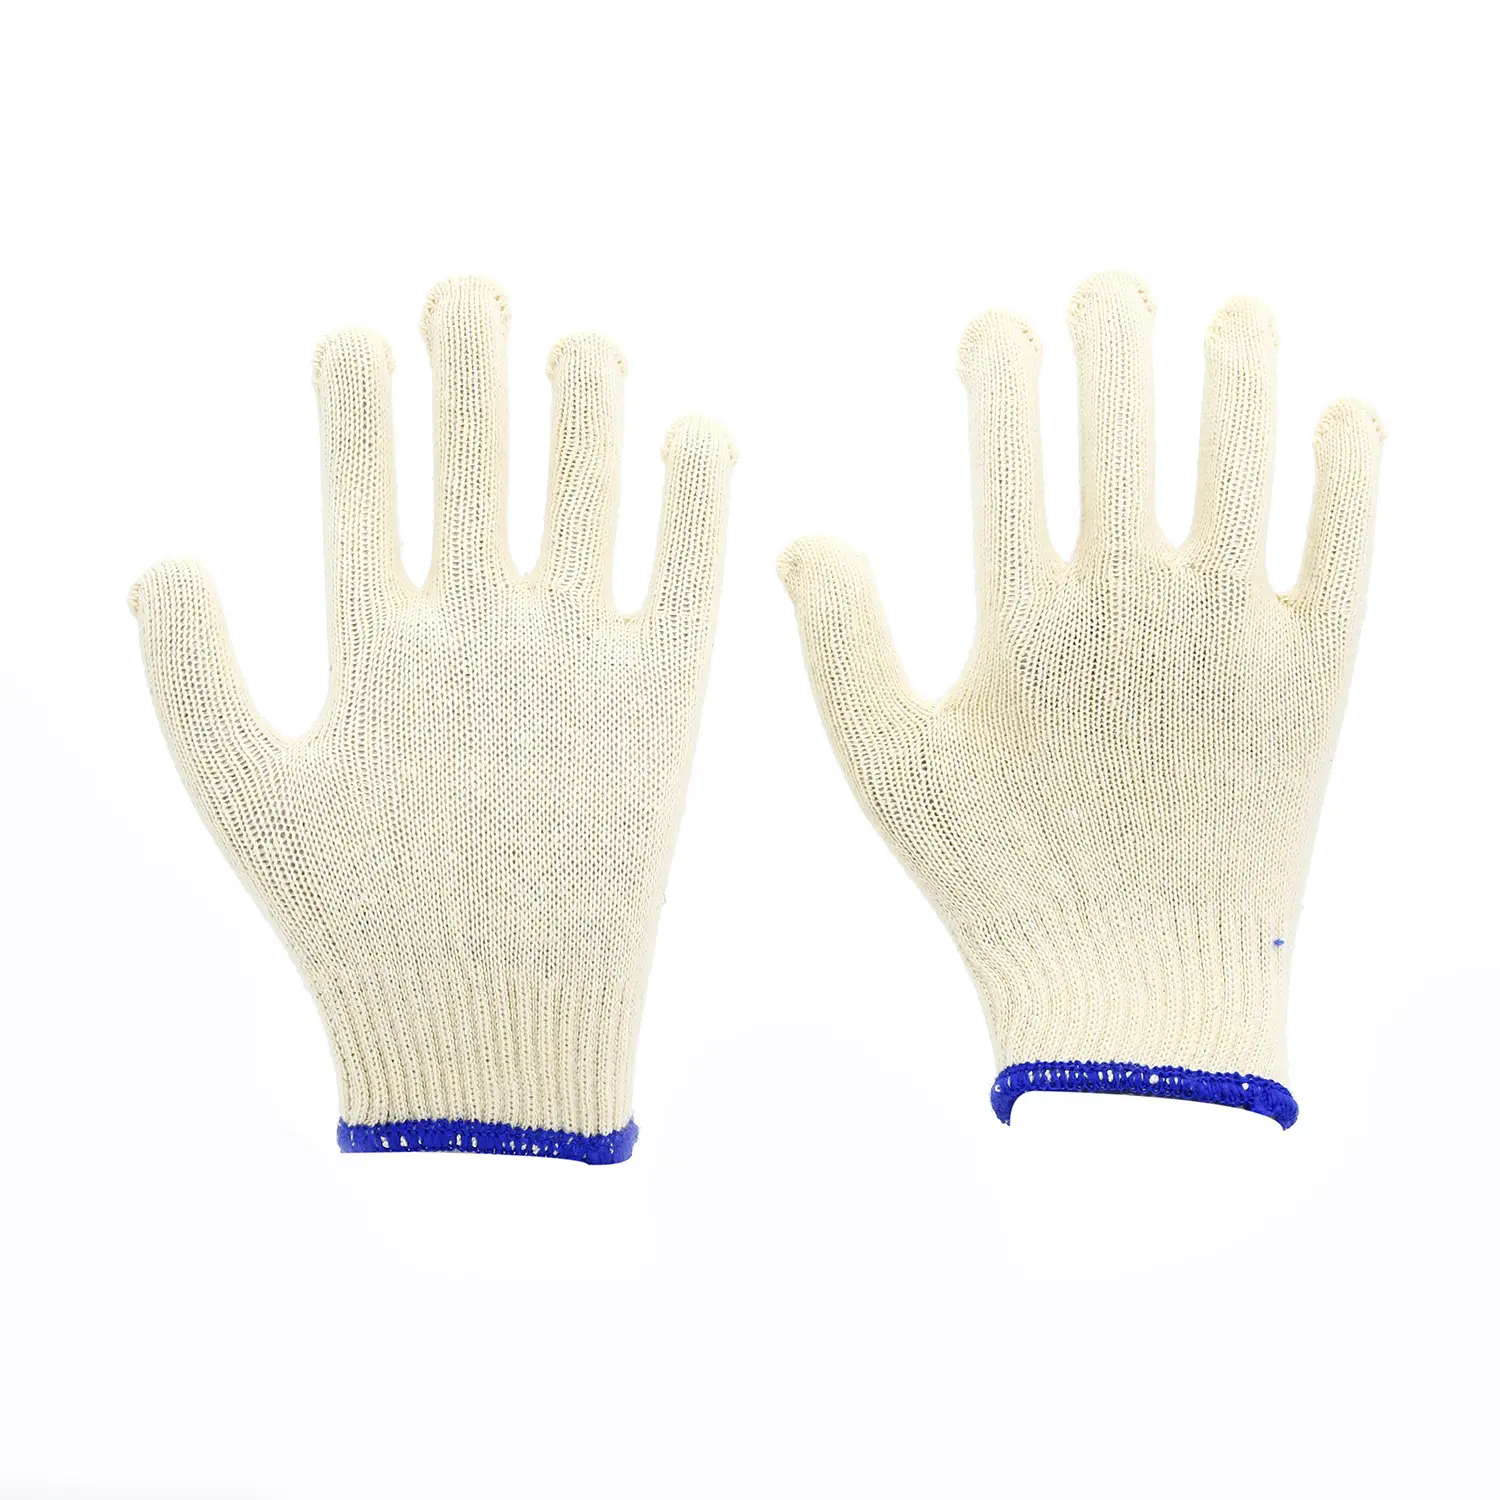 cotton knitted gloves, seamless string knitted hand working gloves, construction safety gloves